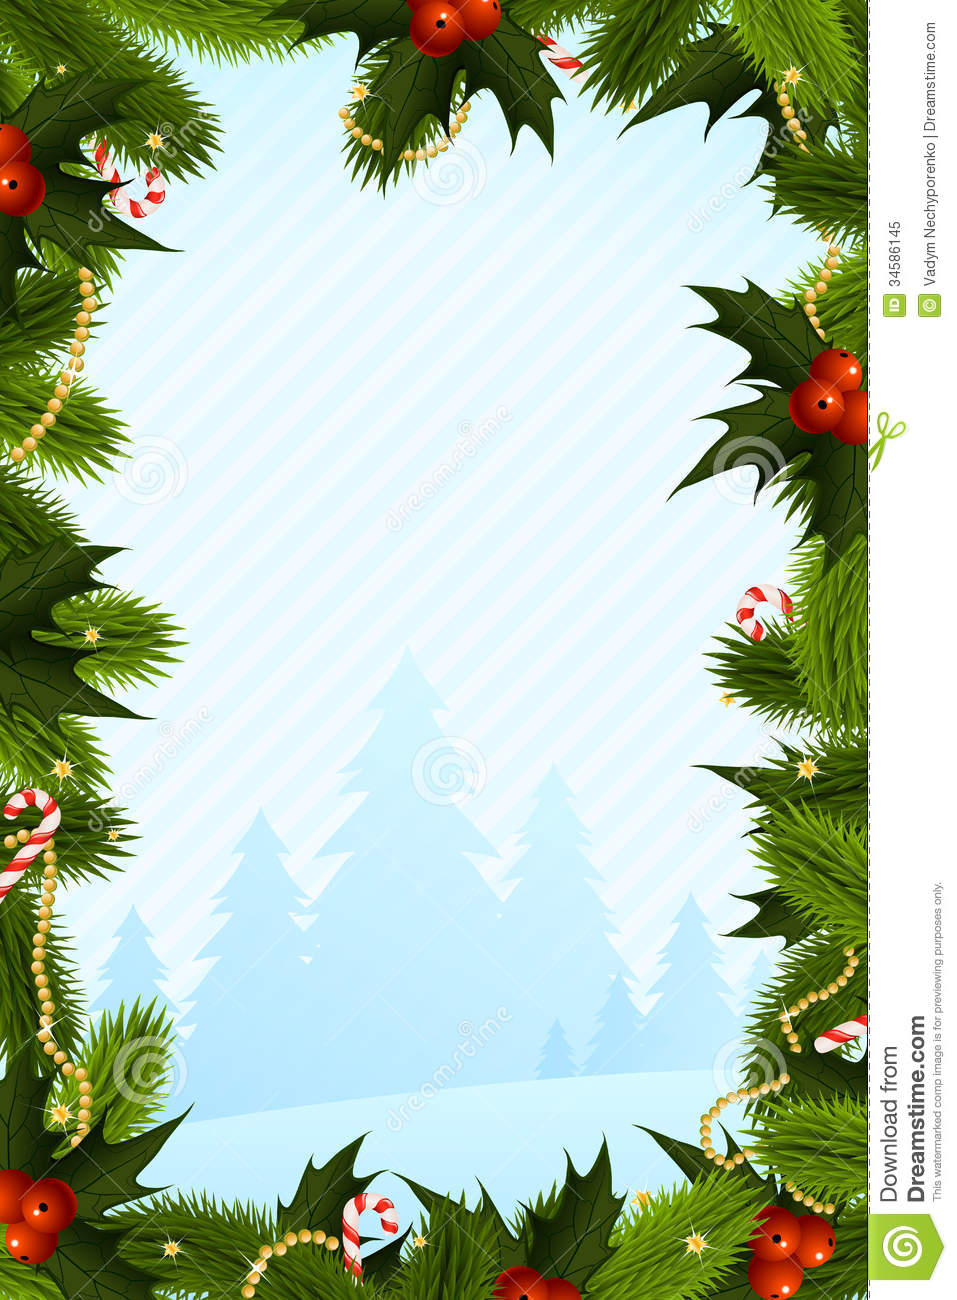 Christmas Card Template Stock Vector. Illustration Of Shape With Regard To Blank Christmas Card Templates Free